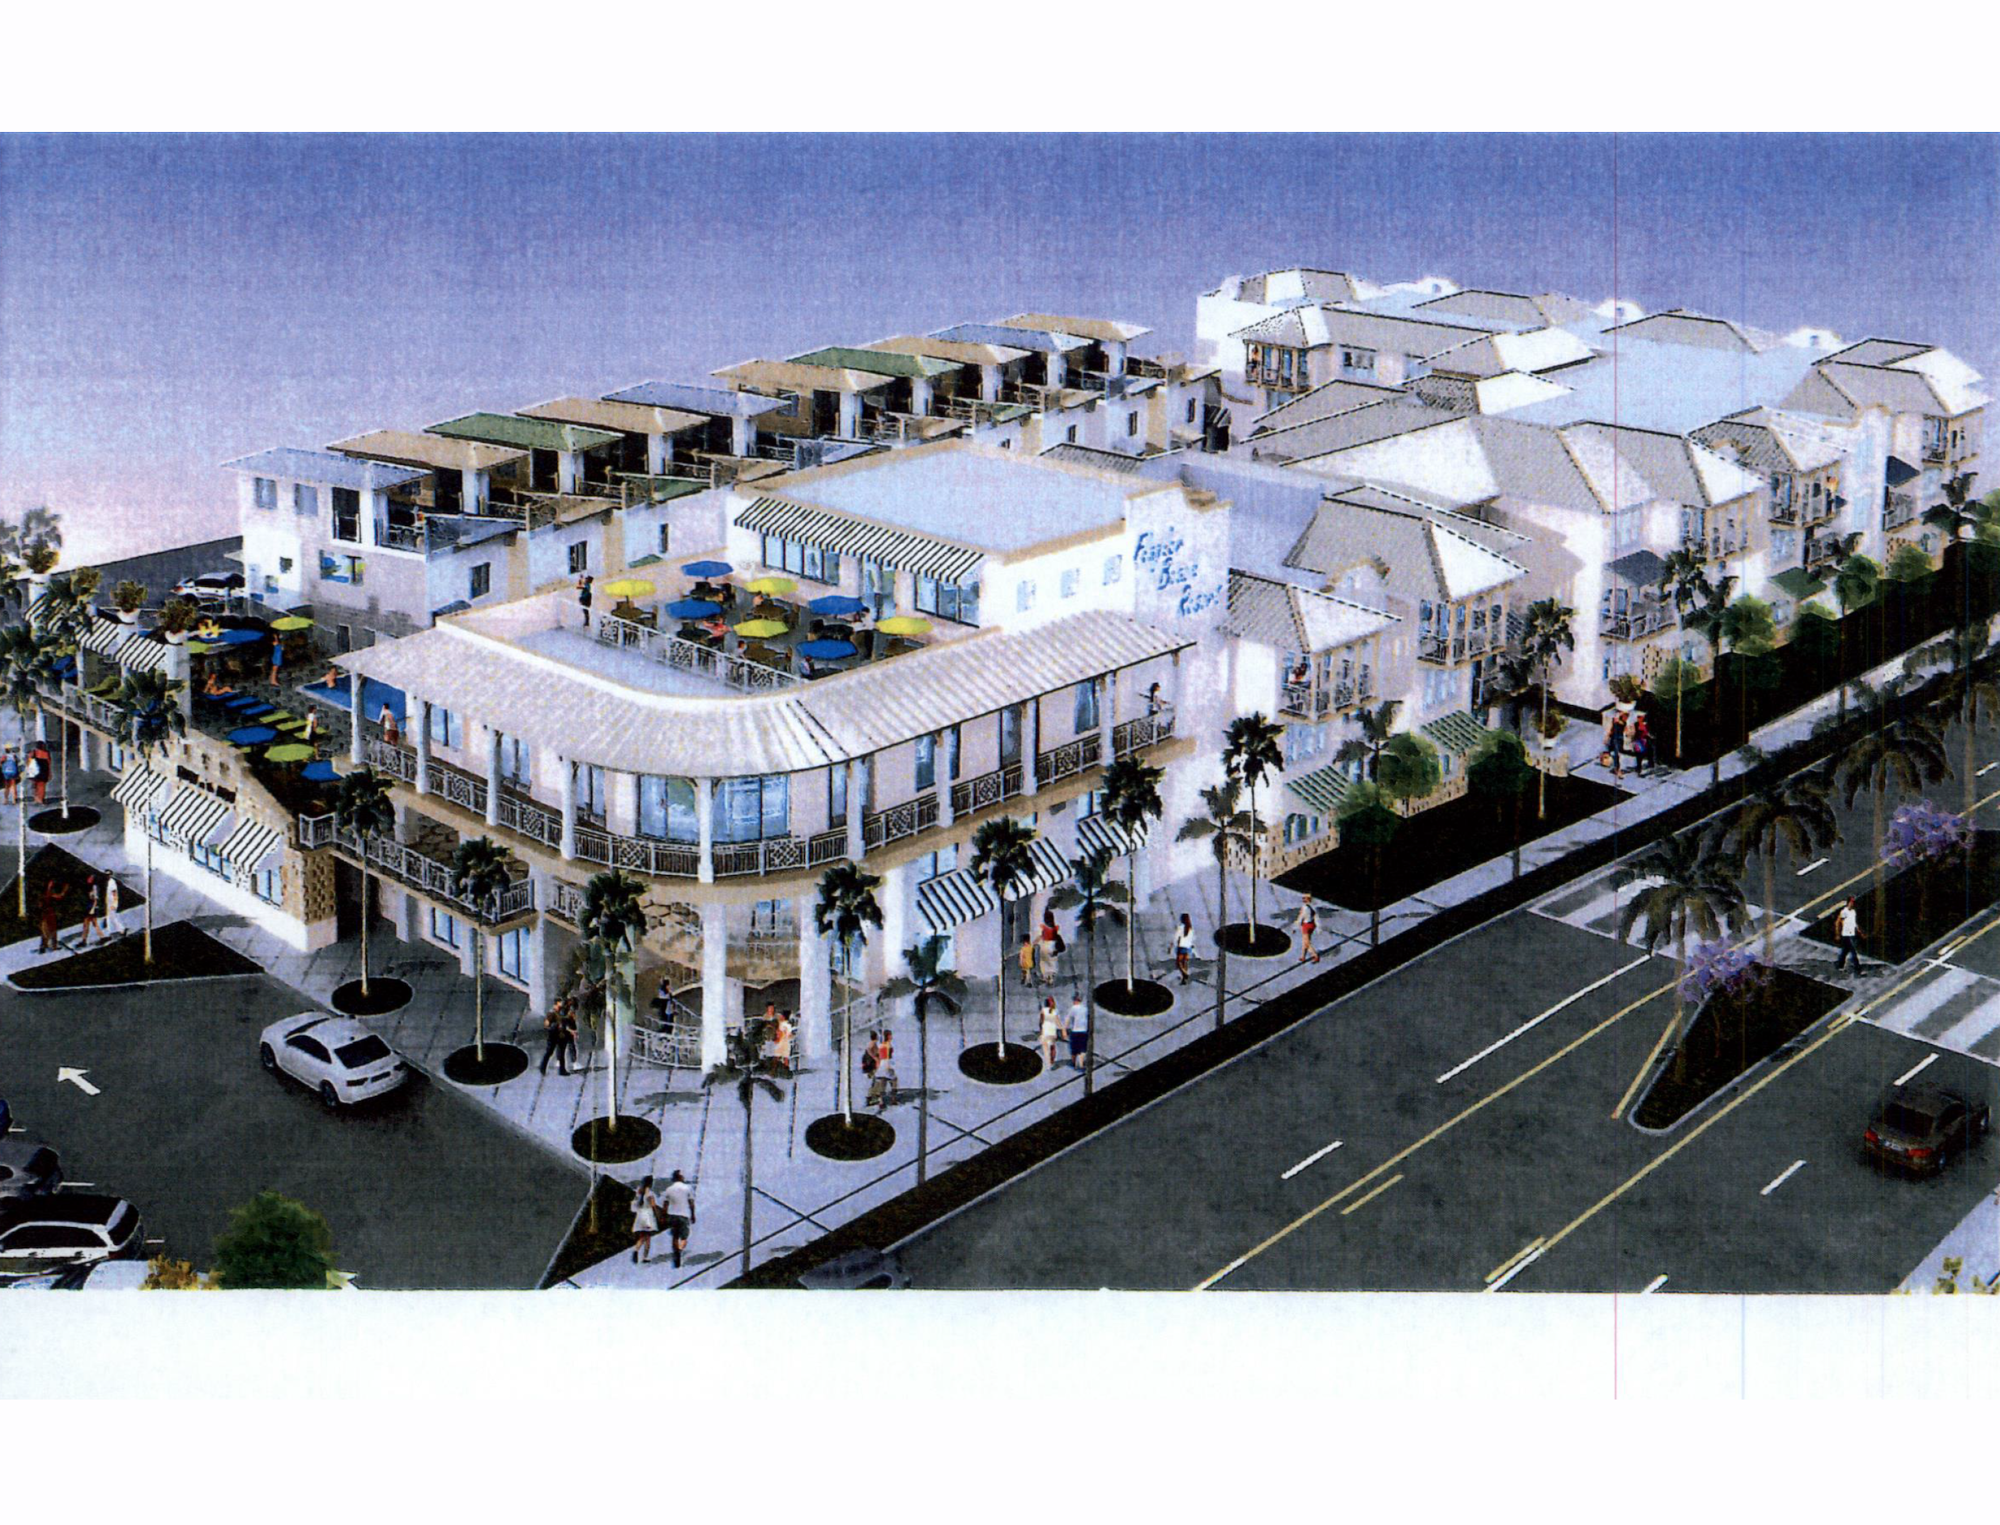 The proposed resort faces State Road 100. Image from city of Flagler Beach meeting backup documentation